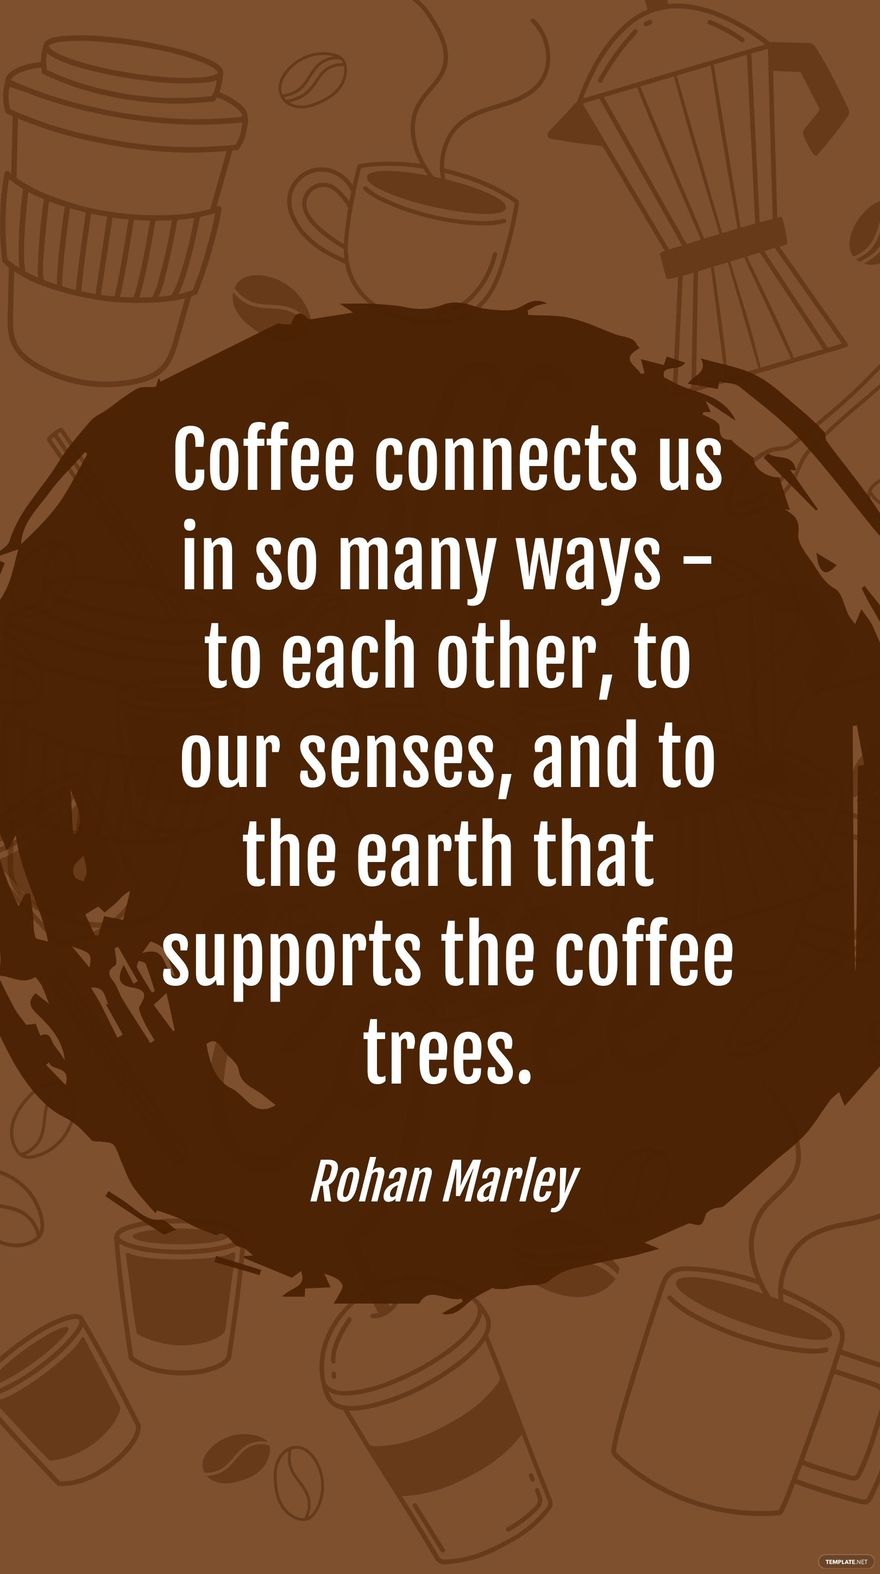 Free Rohan Marley - Coffee connects us in so many ways - to each other, to our senses, and to the earth that supports the coffee trees. in JPG